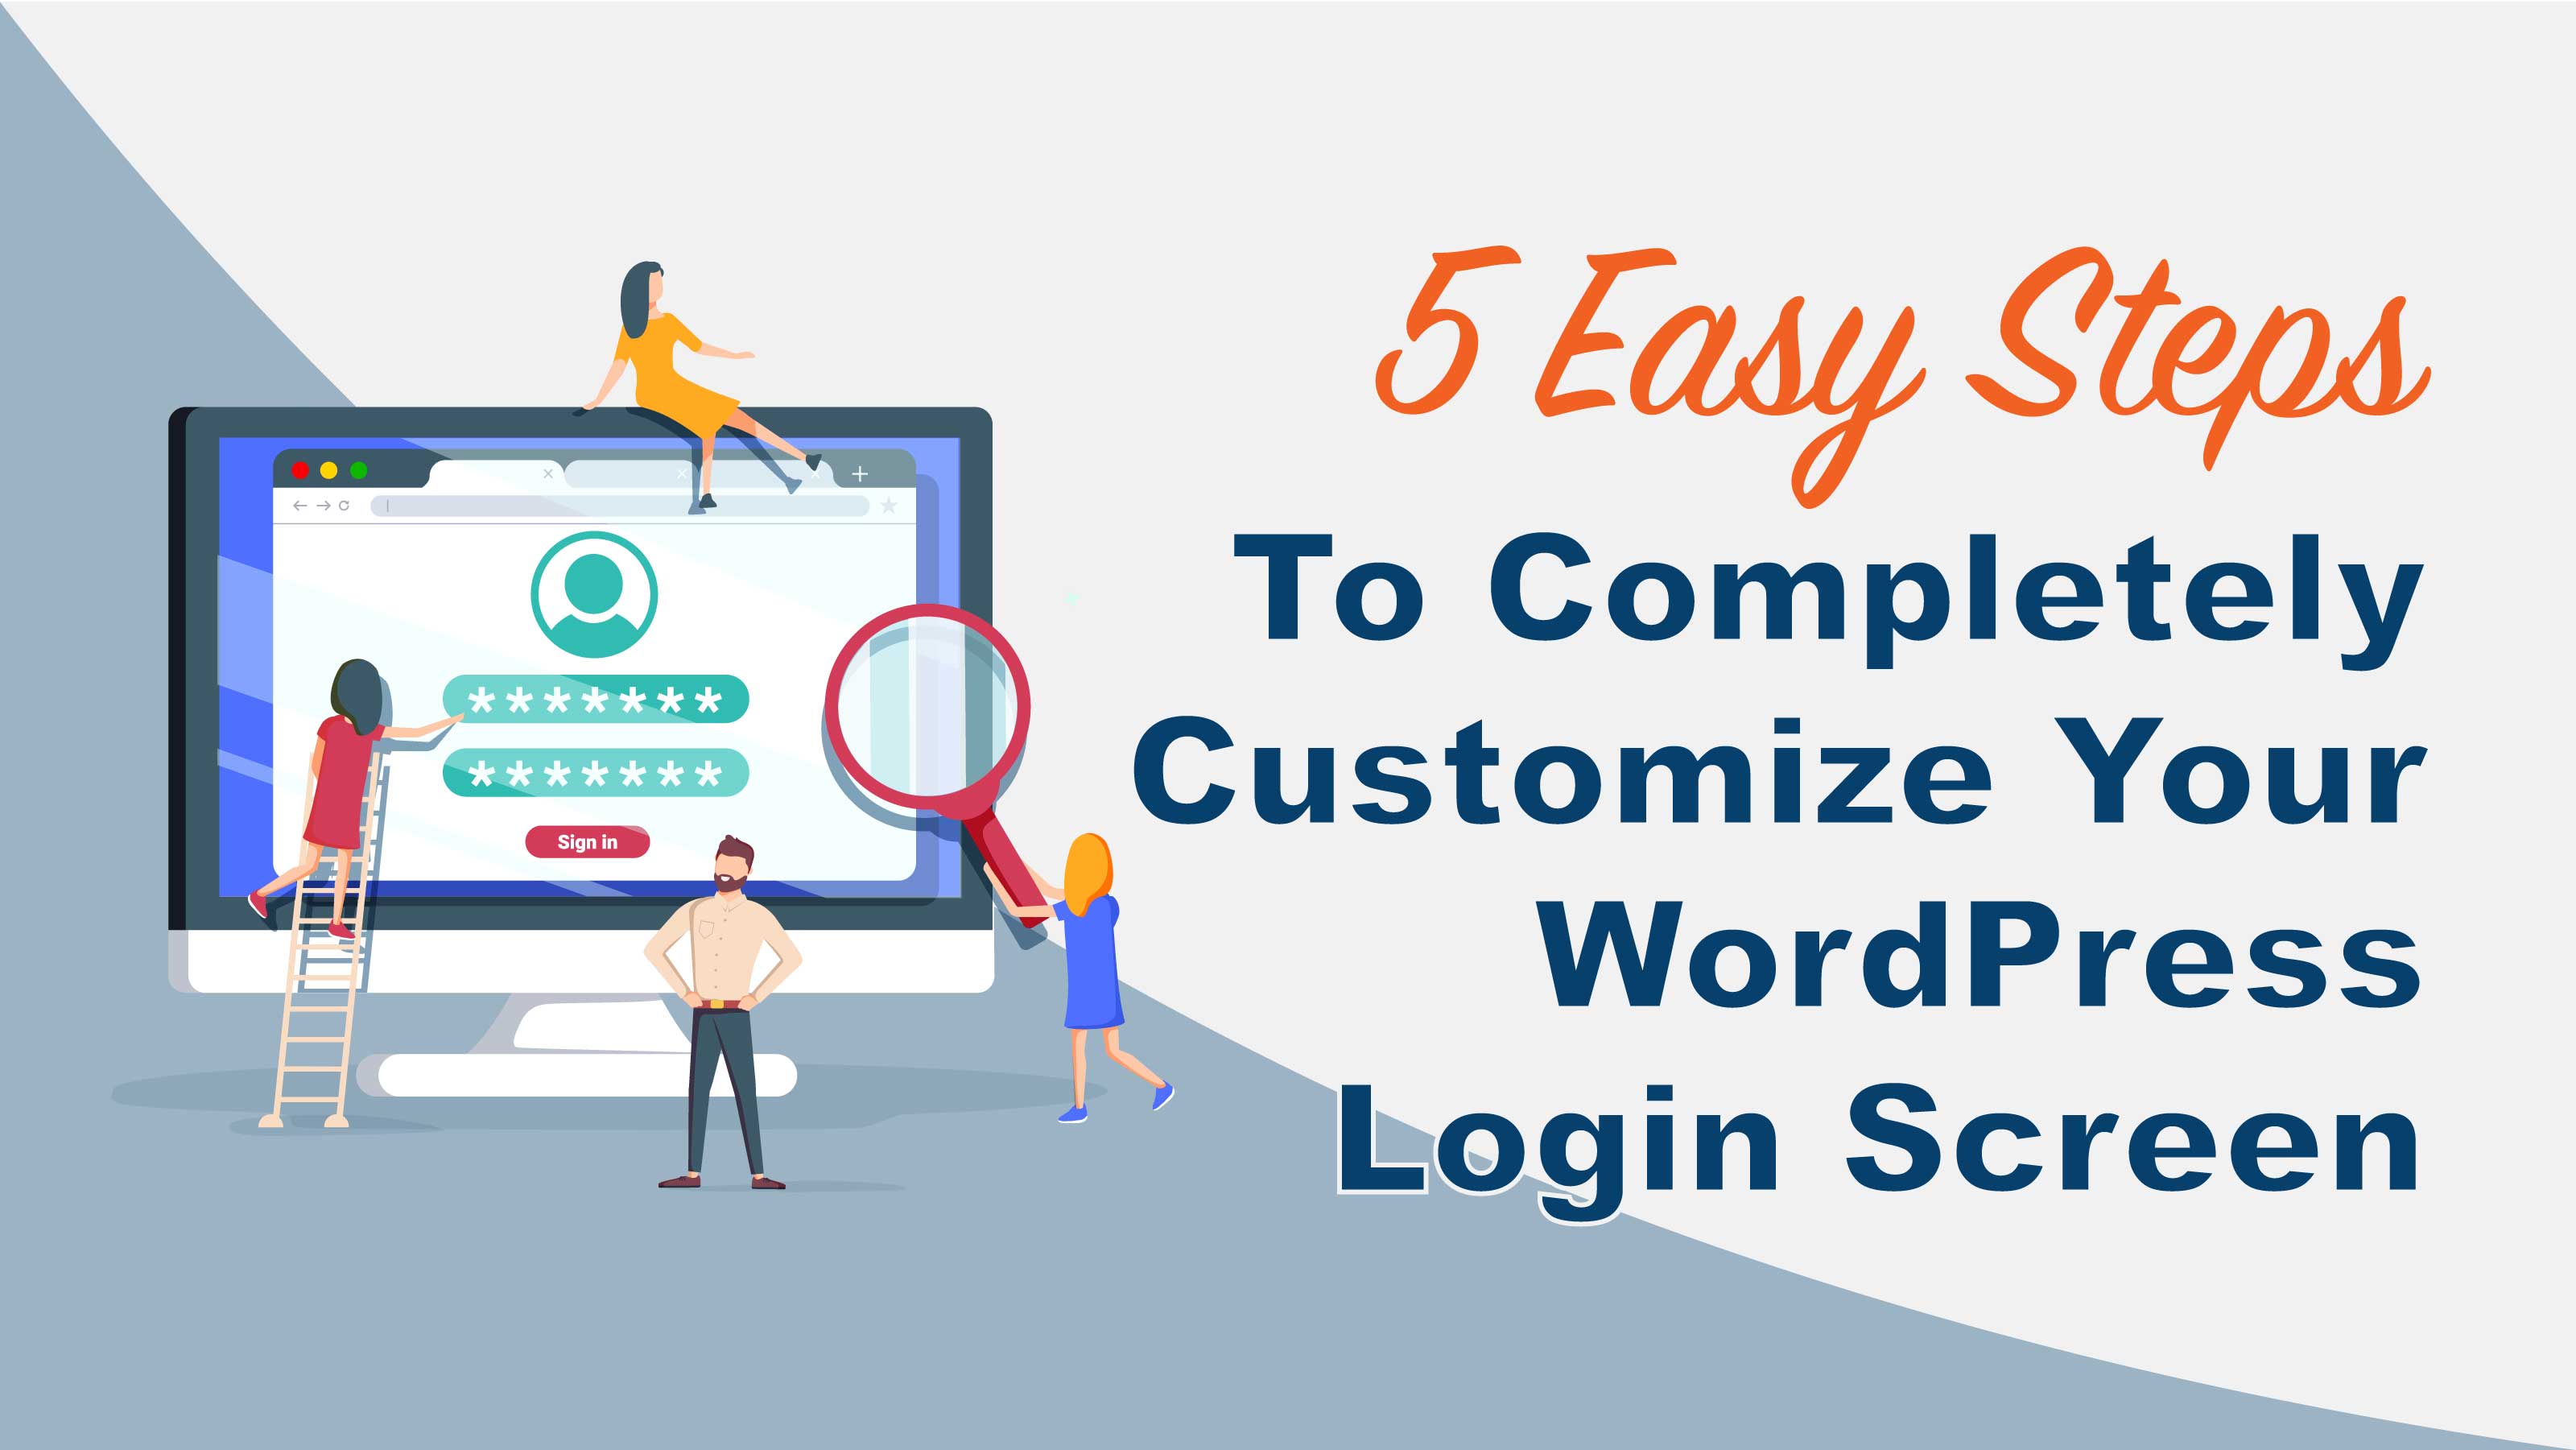 5 Easy Steps to Completely Customize Your WordPress Login Screen